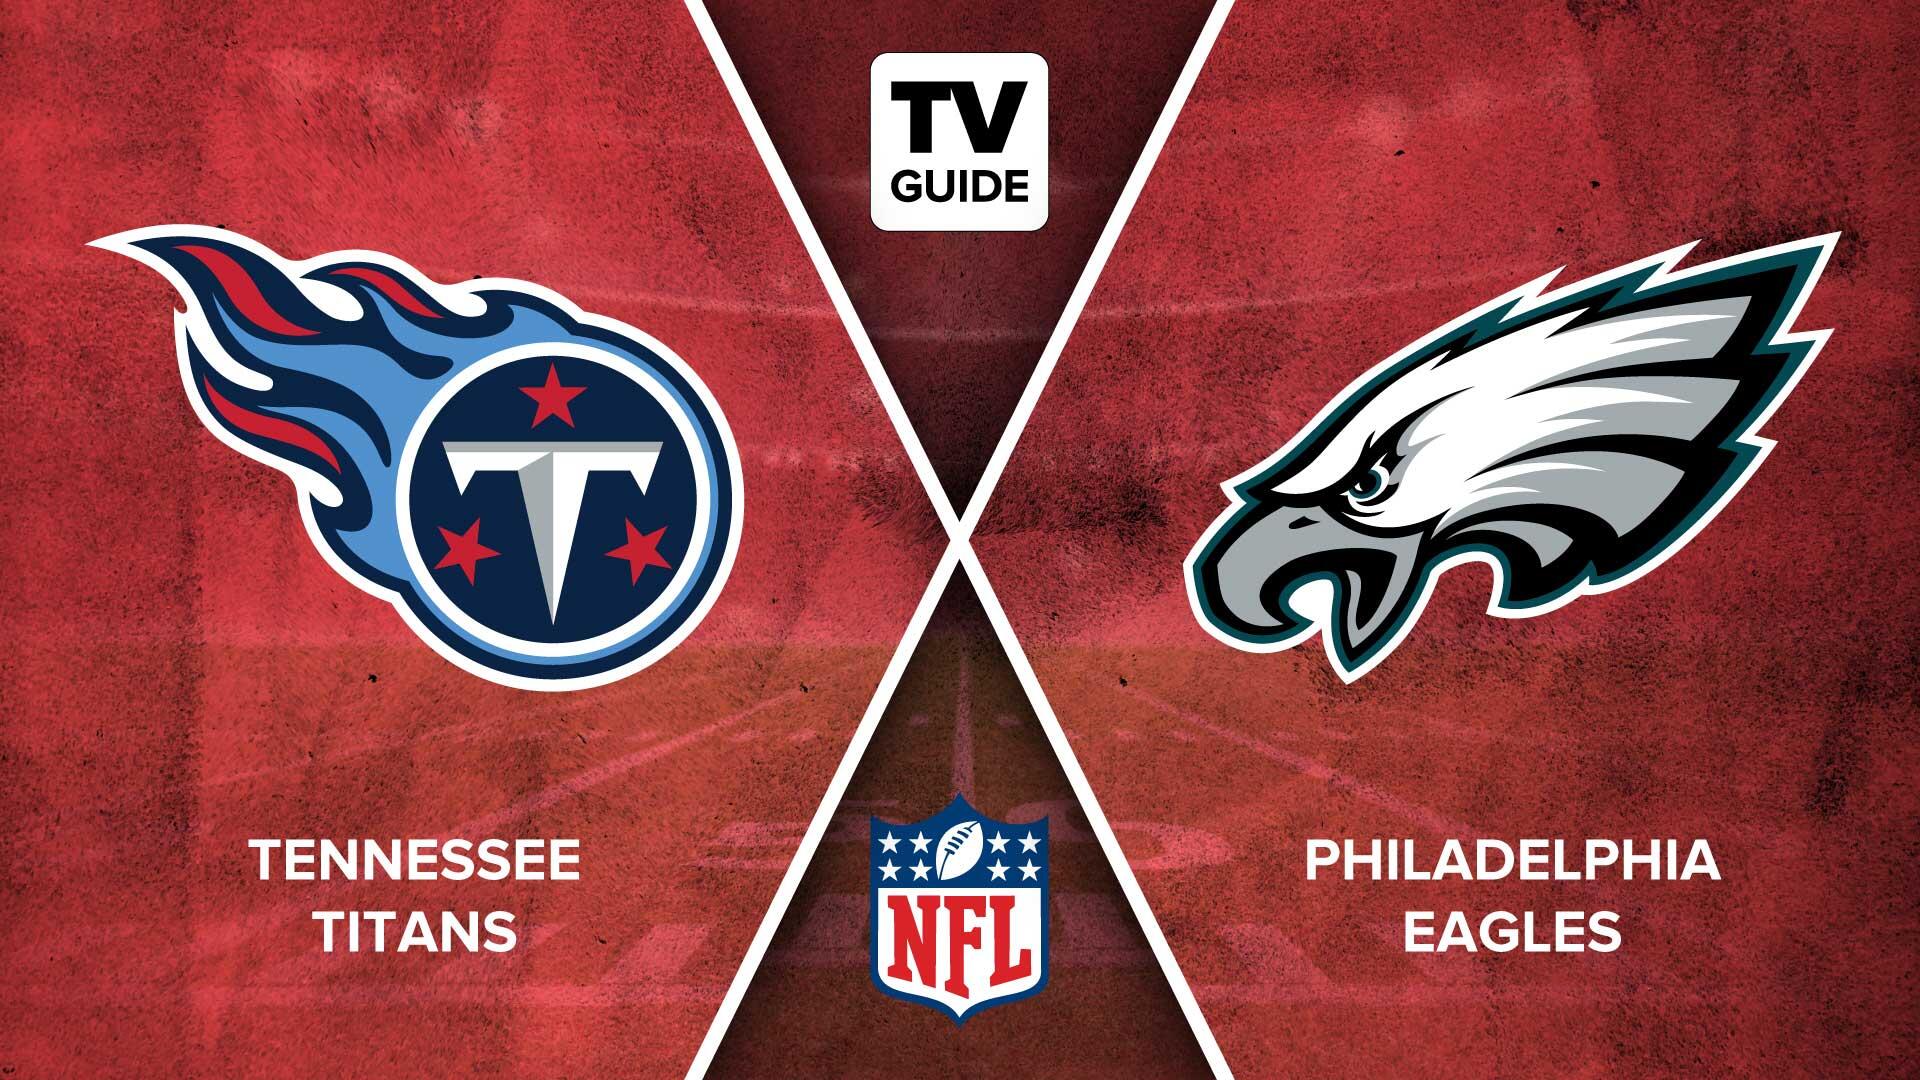 How to Watch Titans vs. Eagles Live on 12/04 - TV Guide